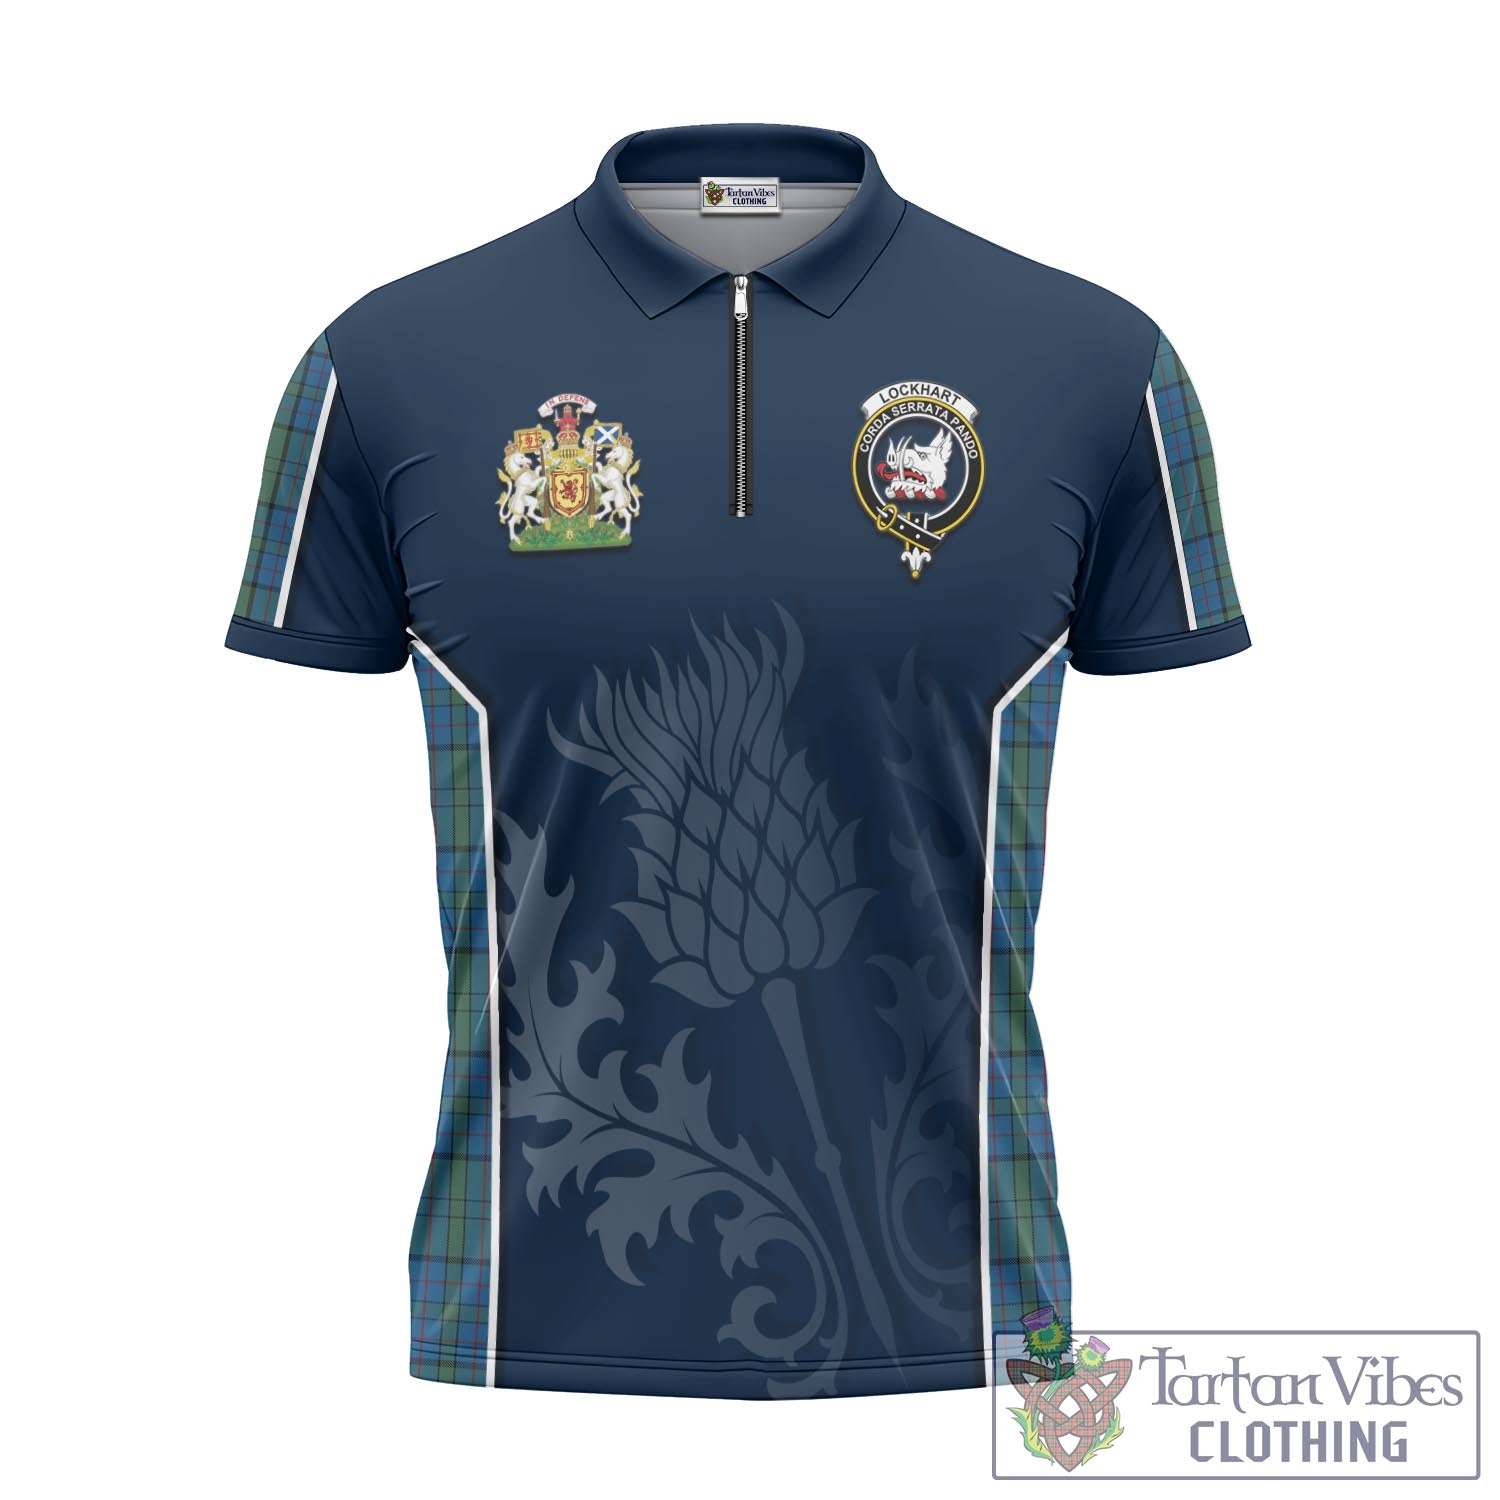 Tartan Vibes Clothing Lockhart Tartan Zipper Polo Shirt with Family Crest and Scottish Thistle Vibes Sport Style